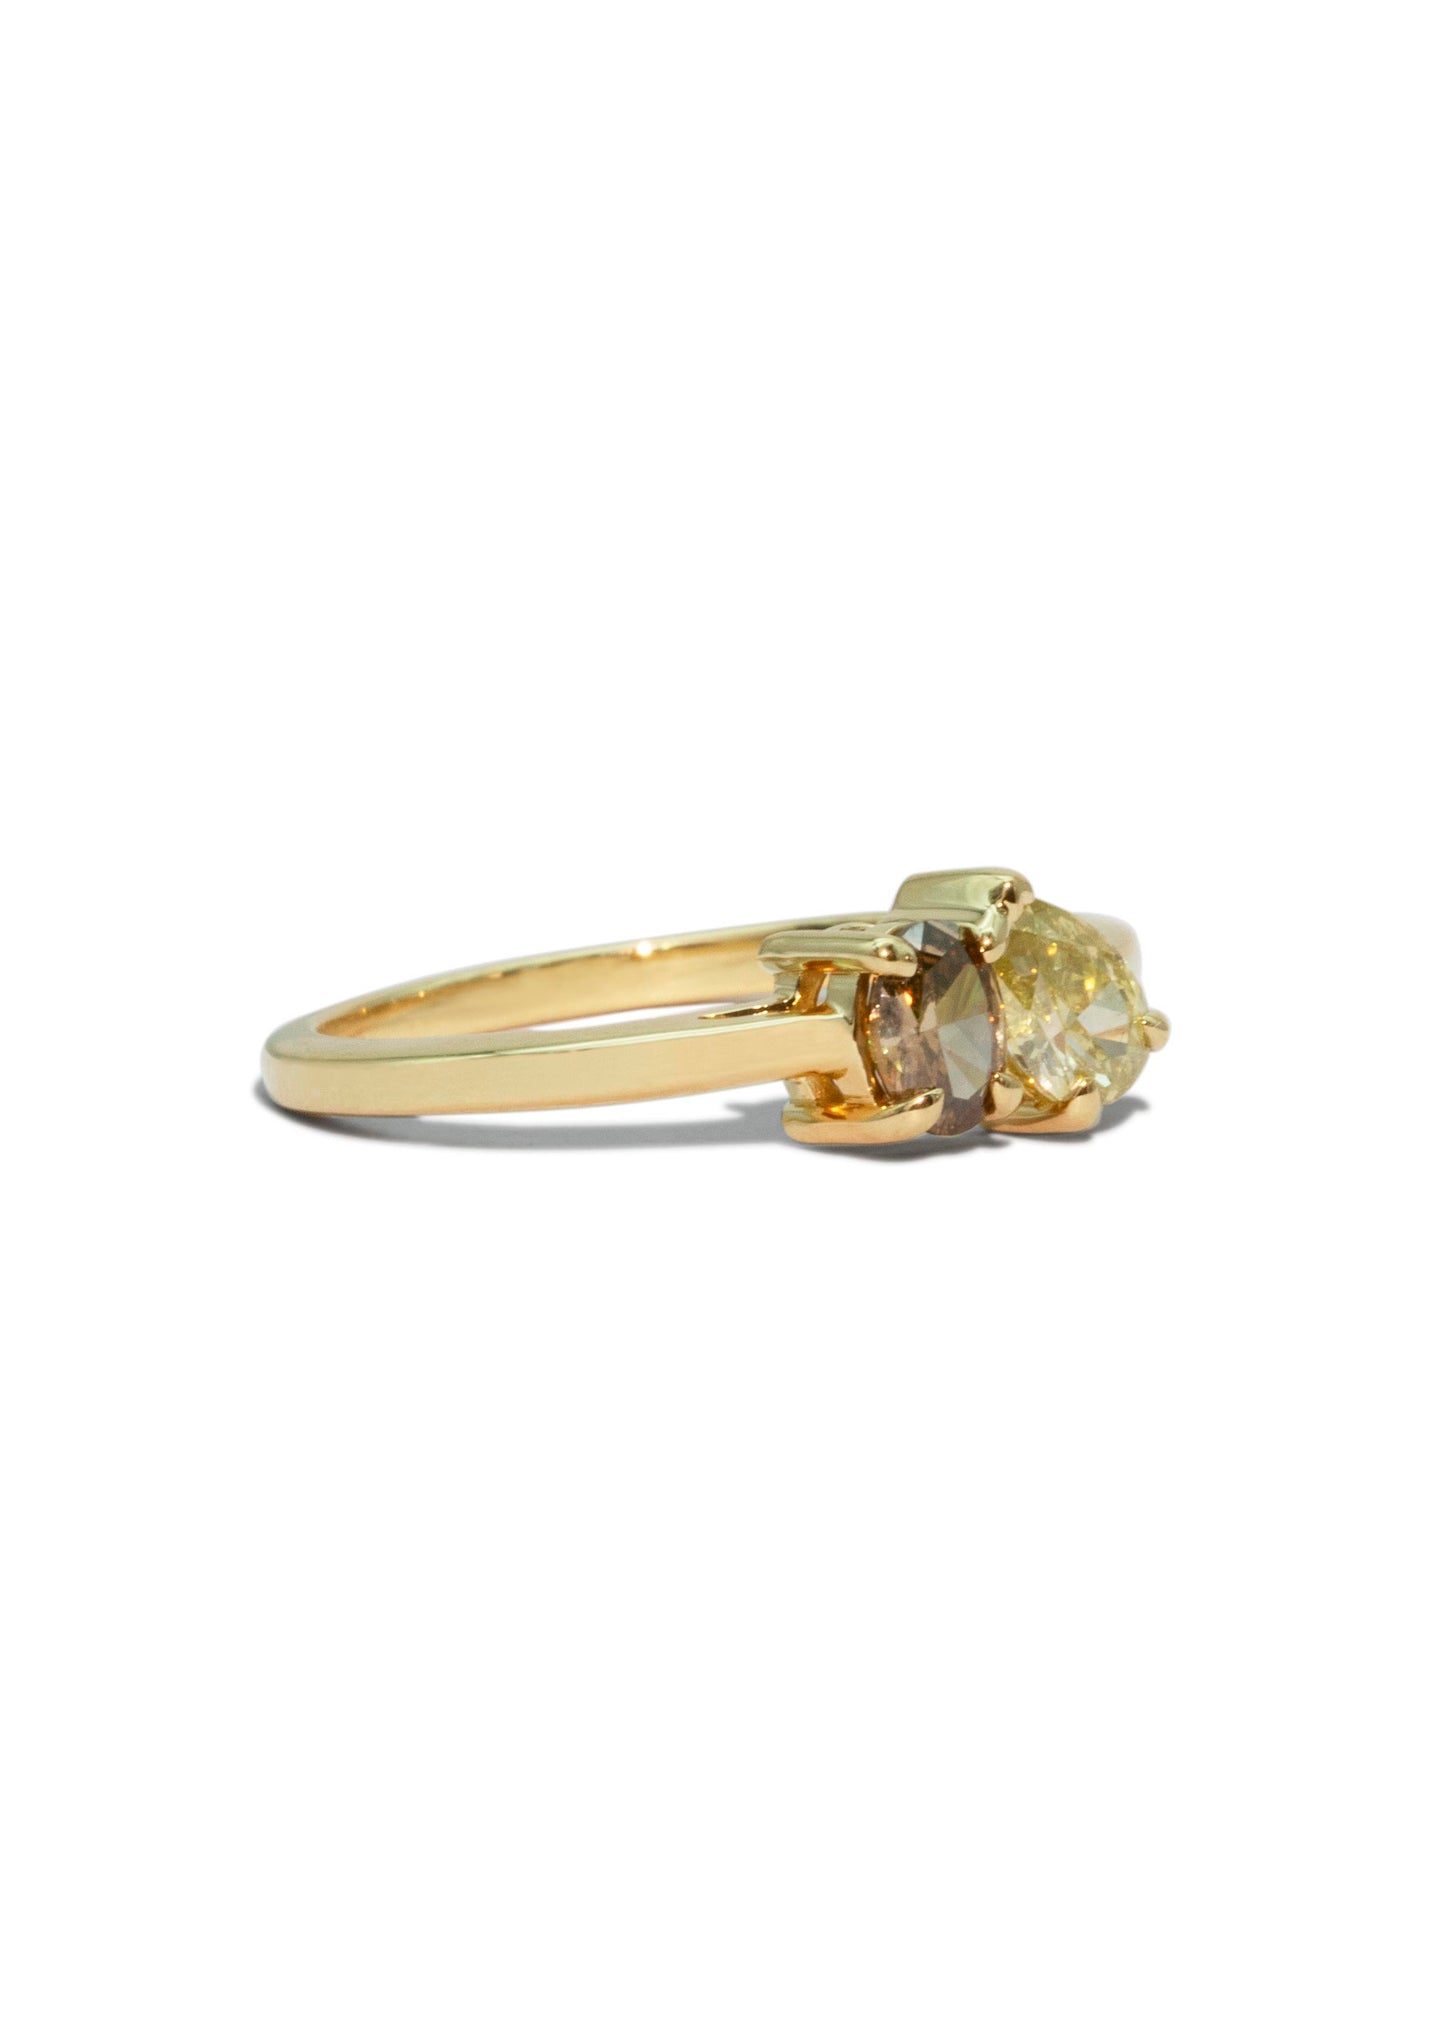 The Toi Et Moi Ring with 0.3ct Cognac Diamond and 0.37ct Champagne Diamond